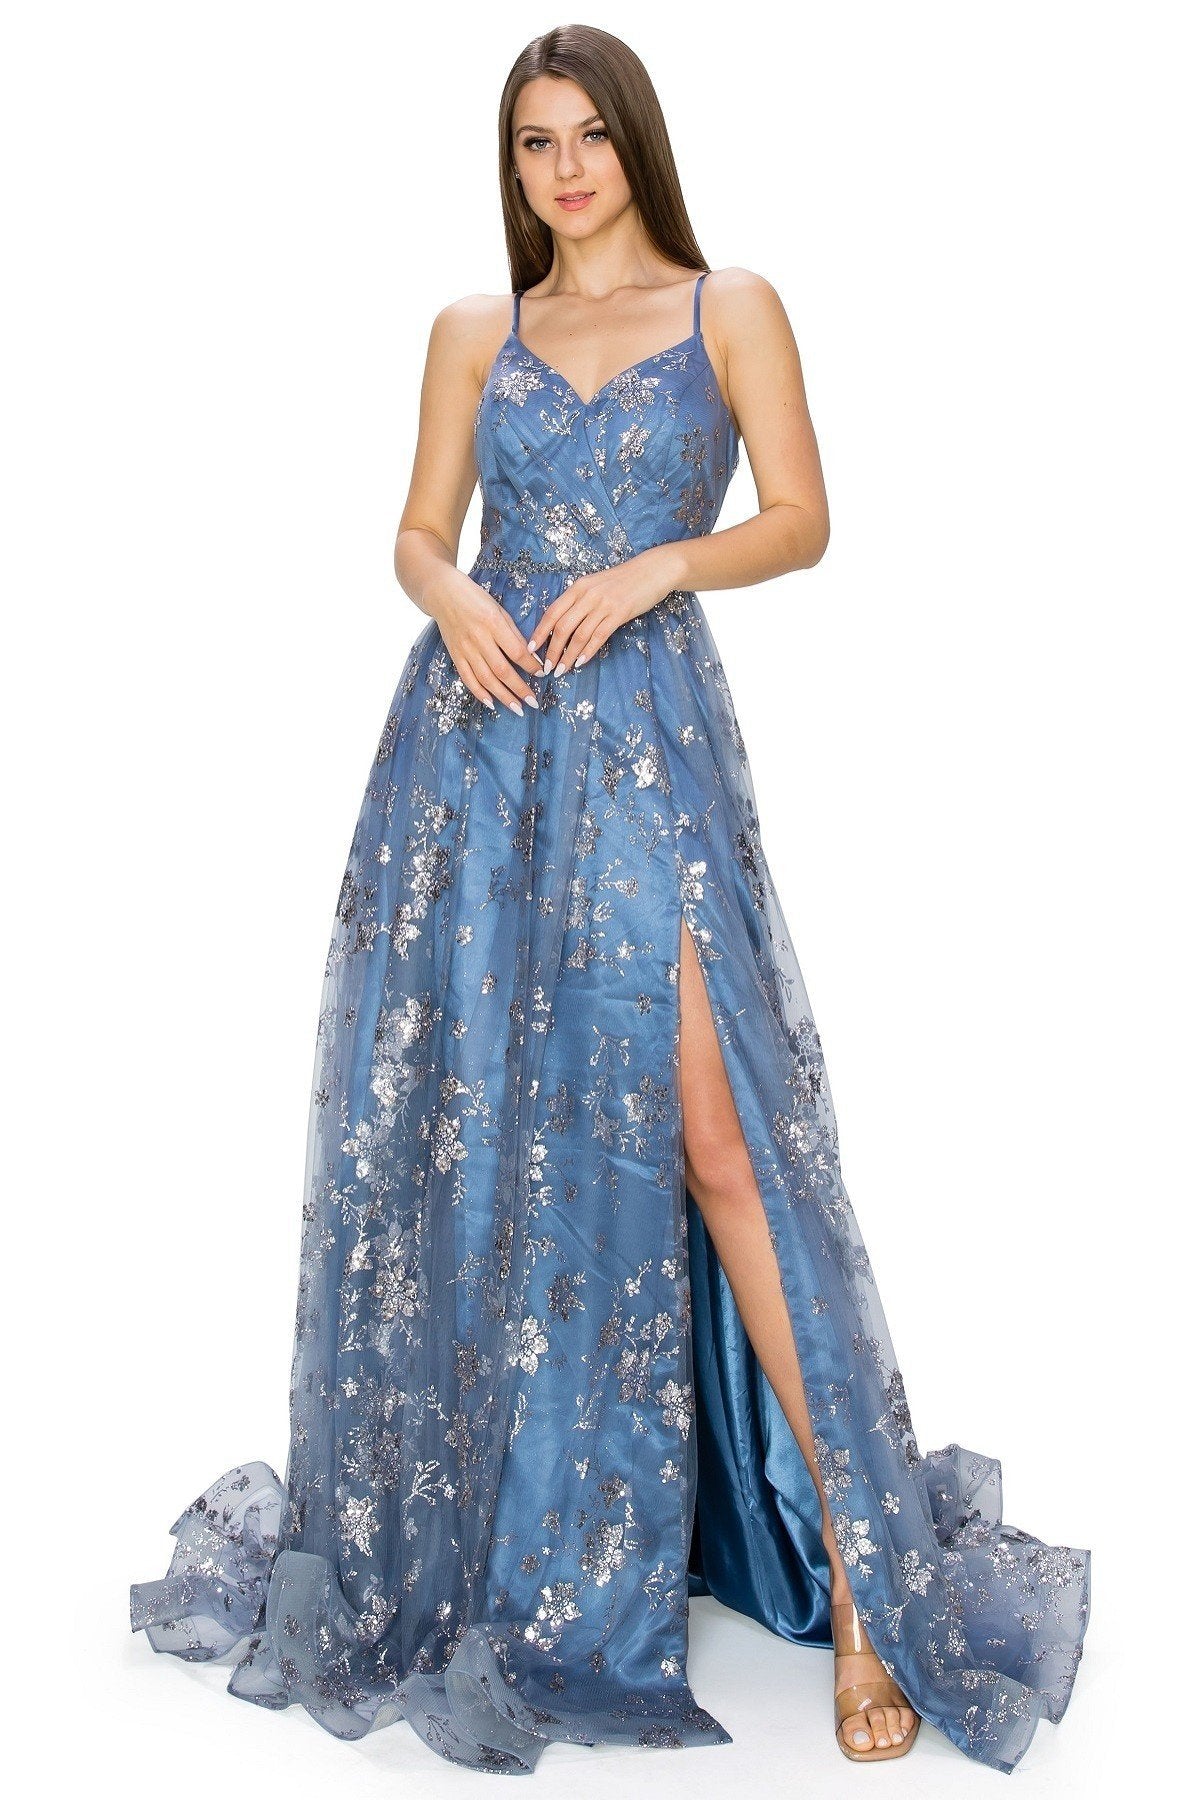 Sequin A-line Gown by Cinderella Couture USA AS8022J-dblue - Special Occasion/Curves